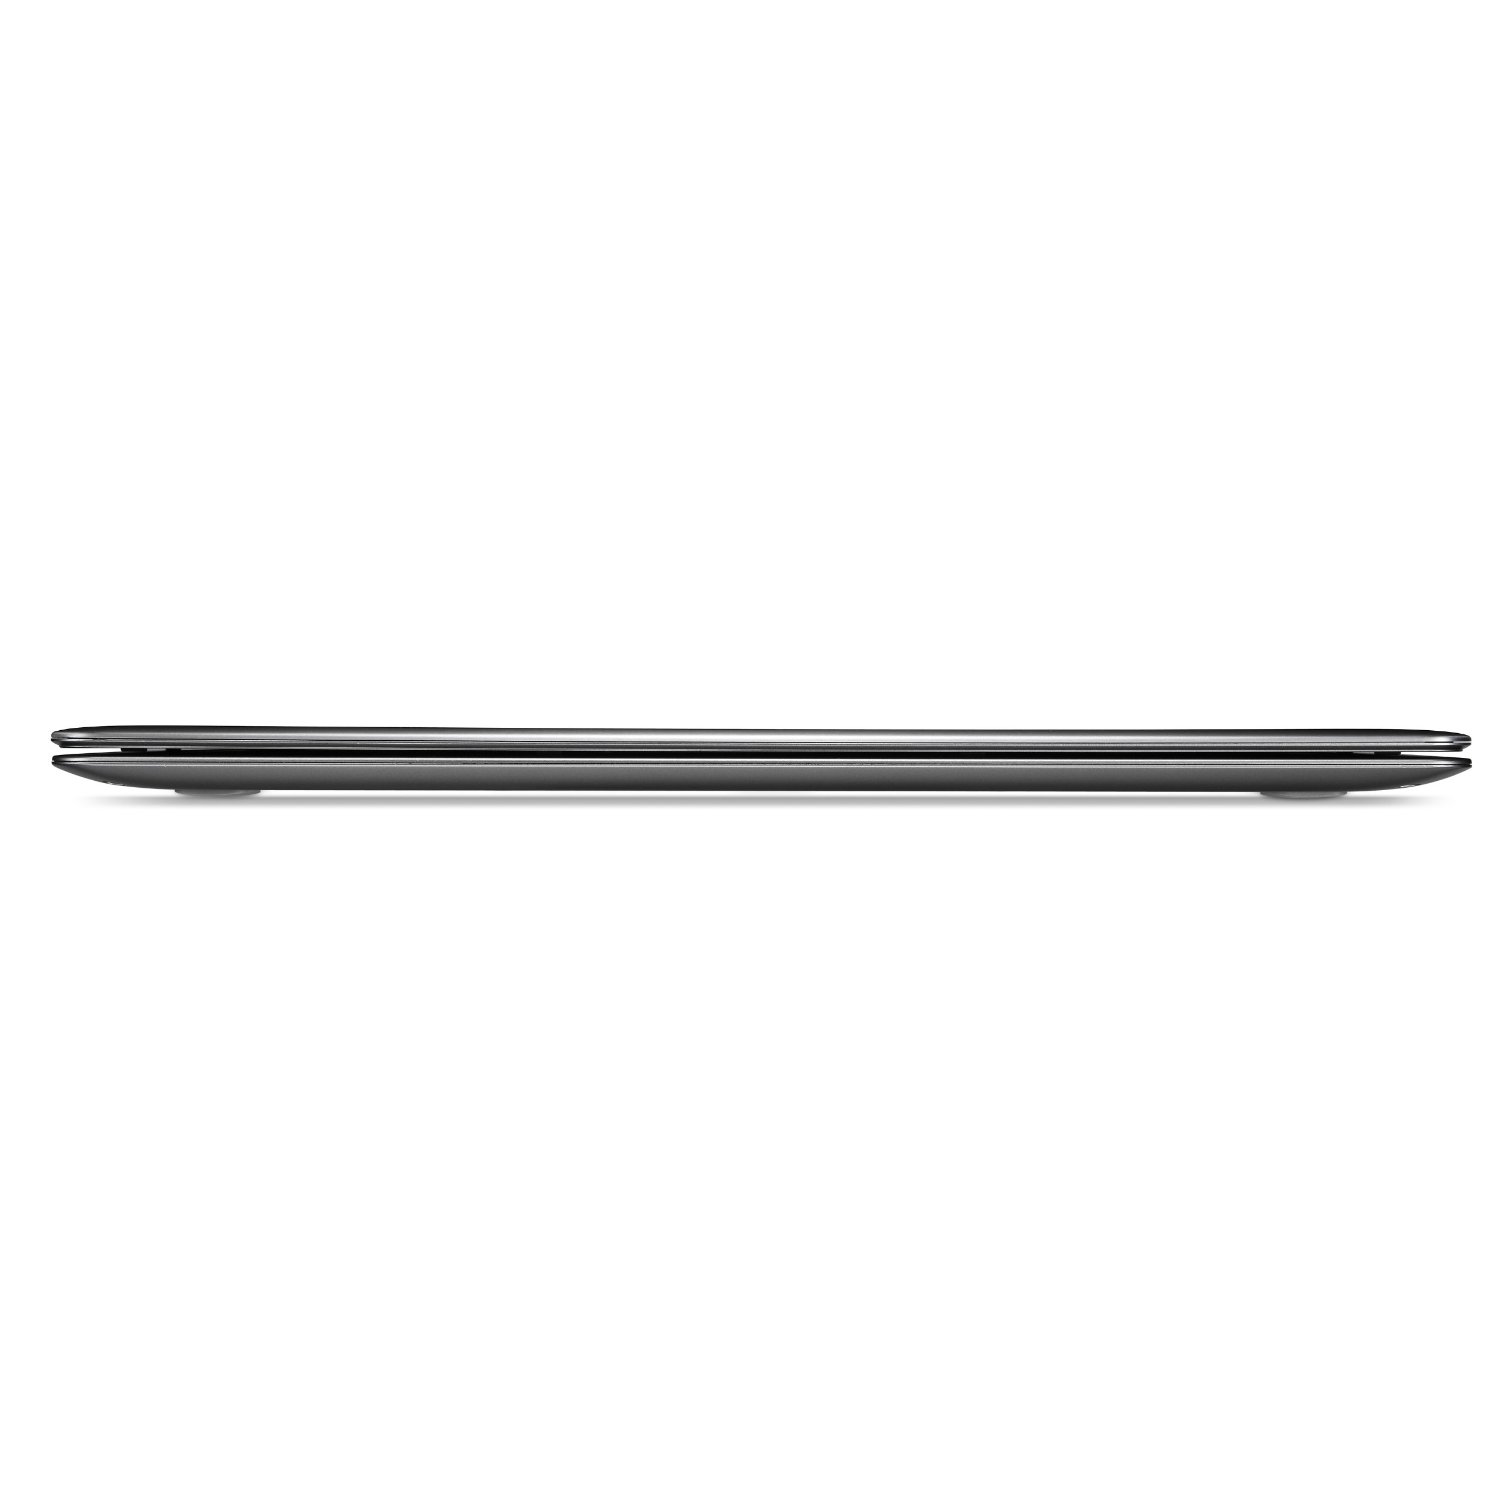 http://thetechjournal.com/wp-content/uploads/images/1110/1318646337-acer-aspire-s39516646-ultrabook-with-133inch-hd-display-13.jpg